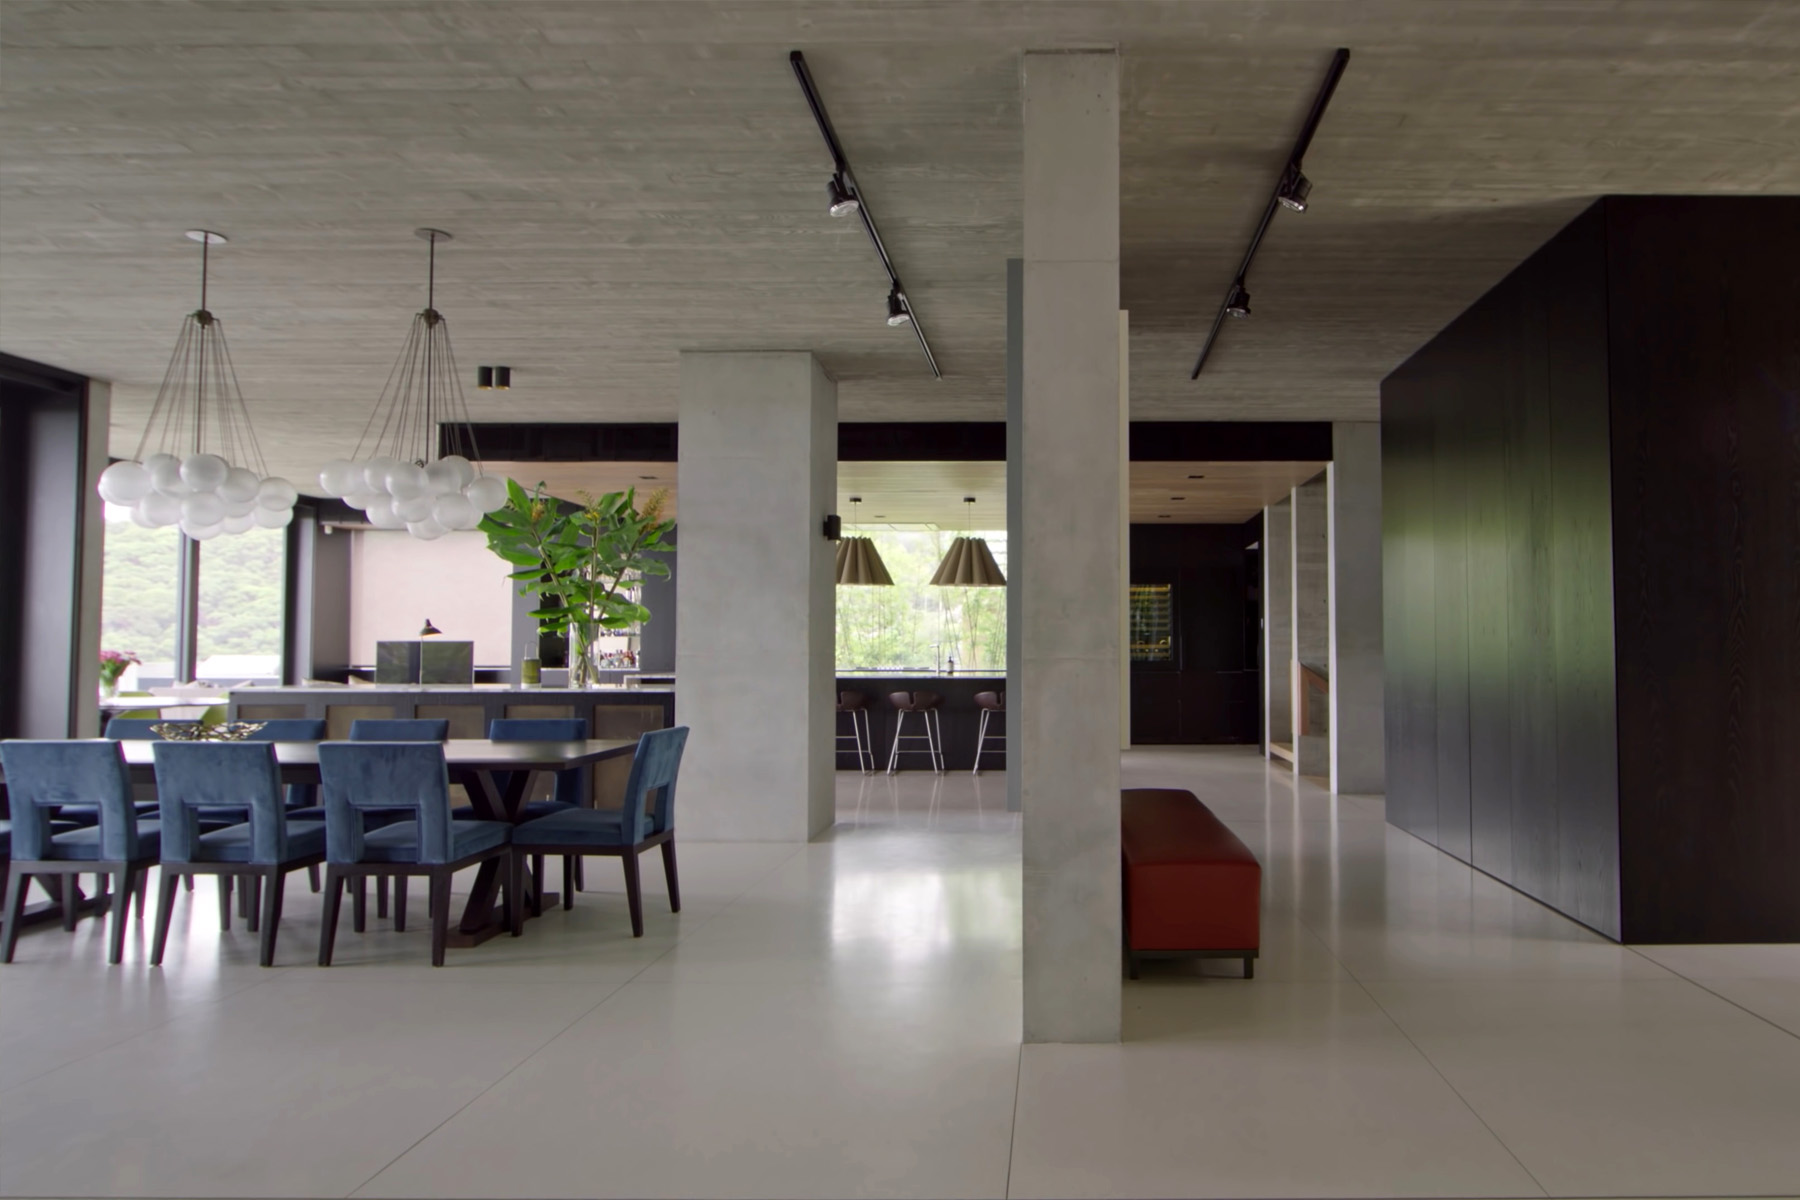 interior walls and ceiling made from poured concrete